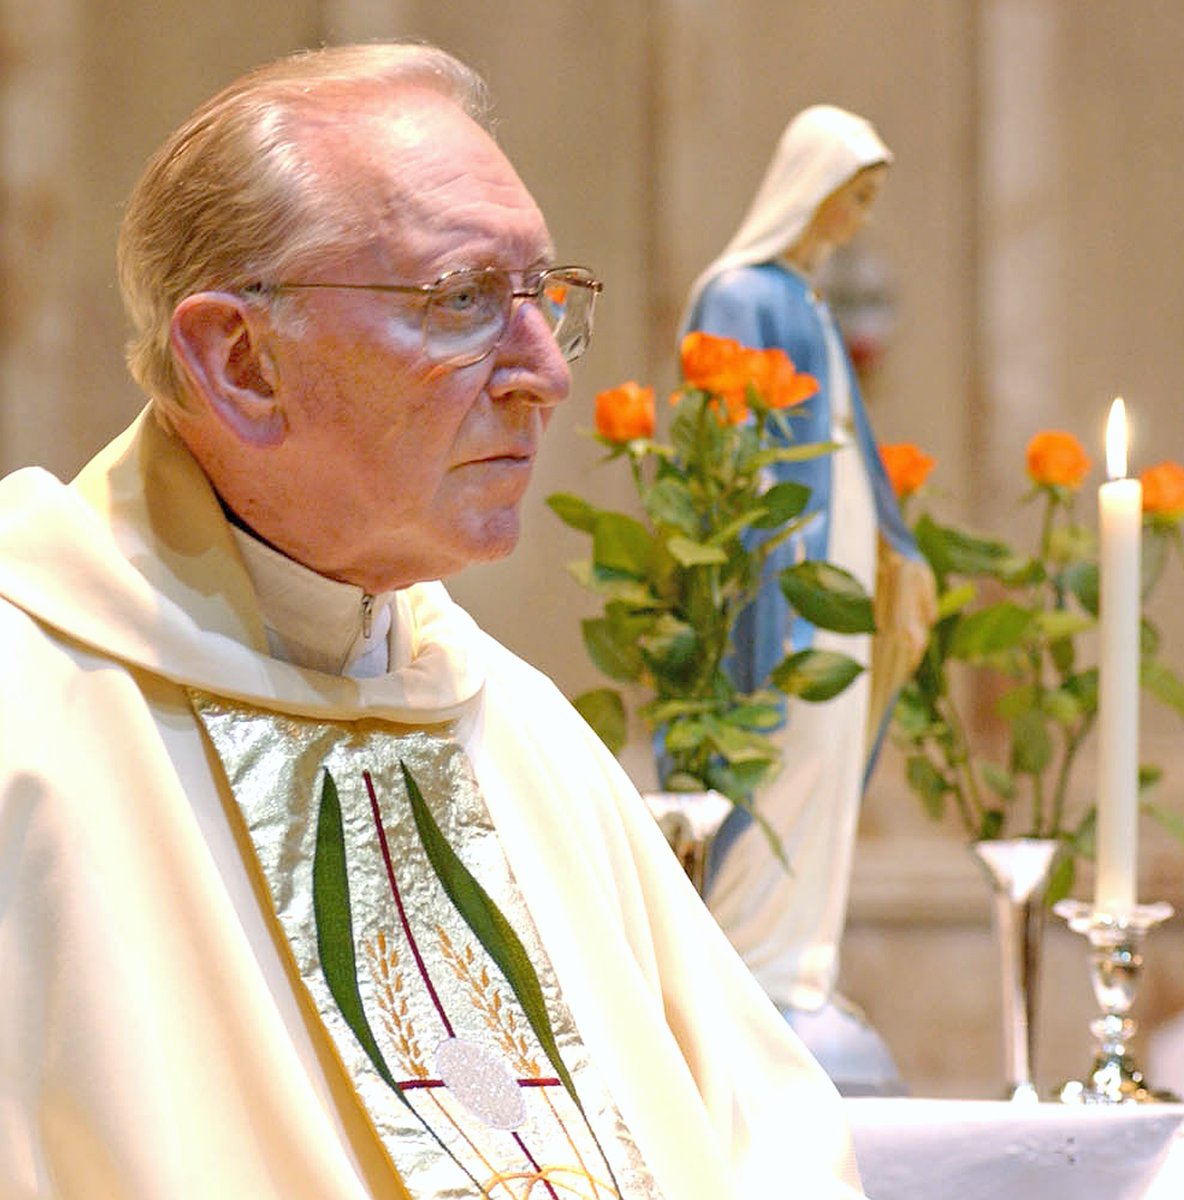 Glasgow' oldest priest has died just weeks before his 100th birthday. Fr Des Broderick was a much loved figure whose gentle manner, devotion to Our Lady and wisdom won the hearts of all who met him. More at rcag.org.uk